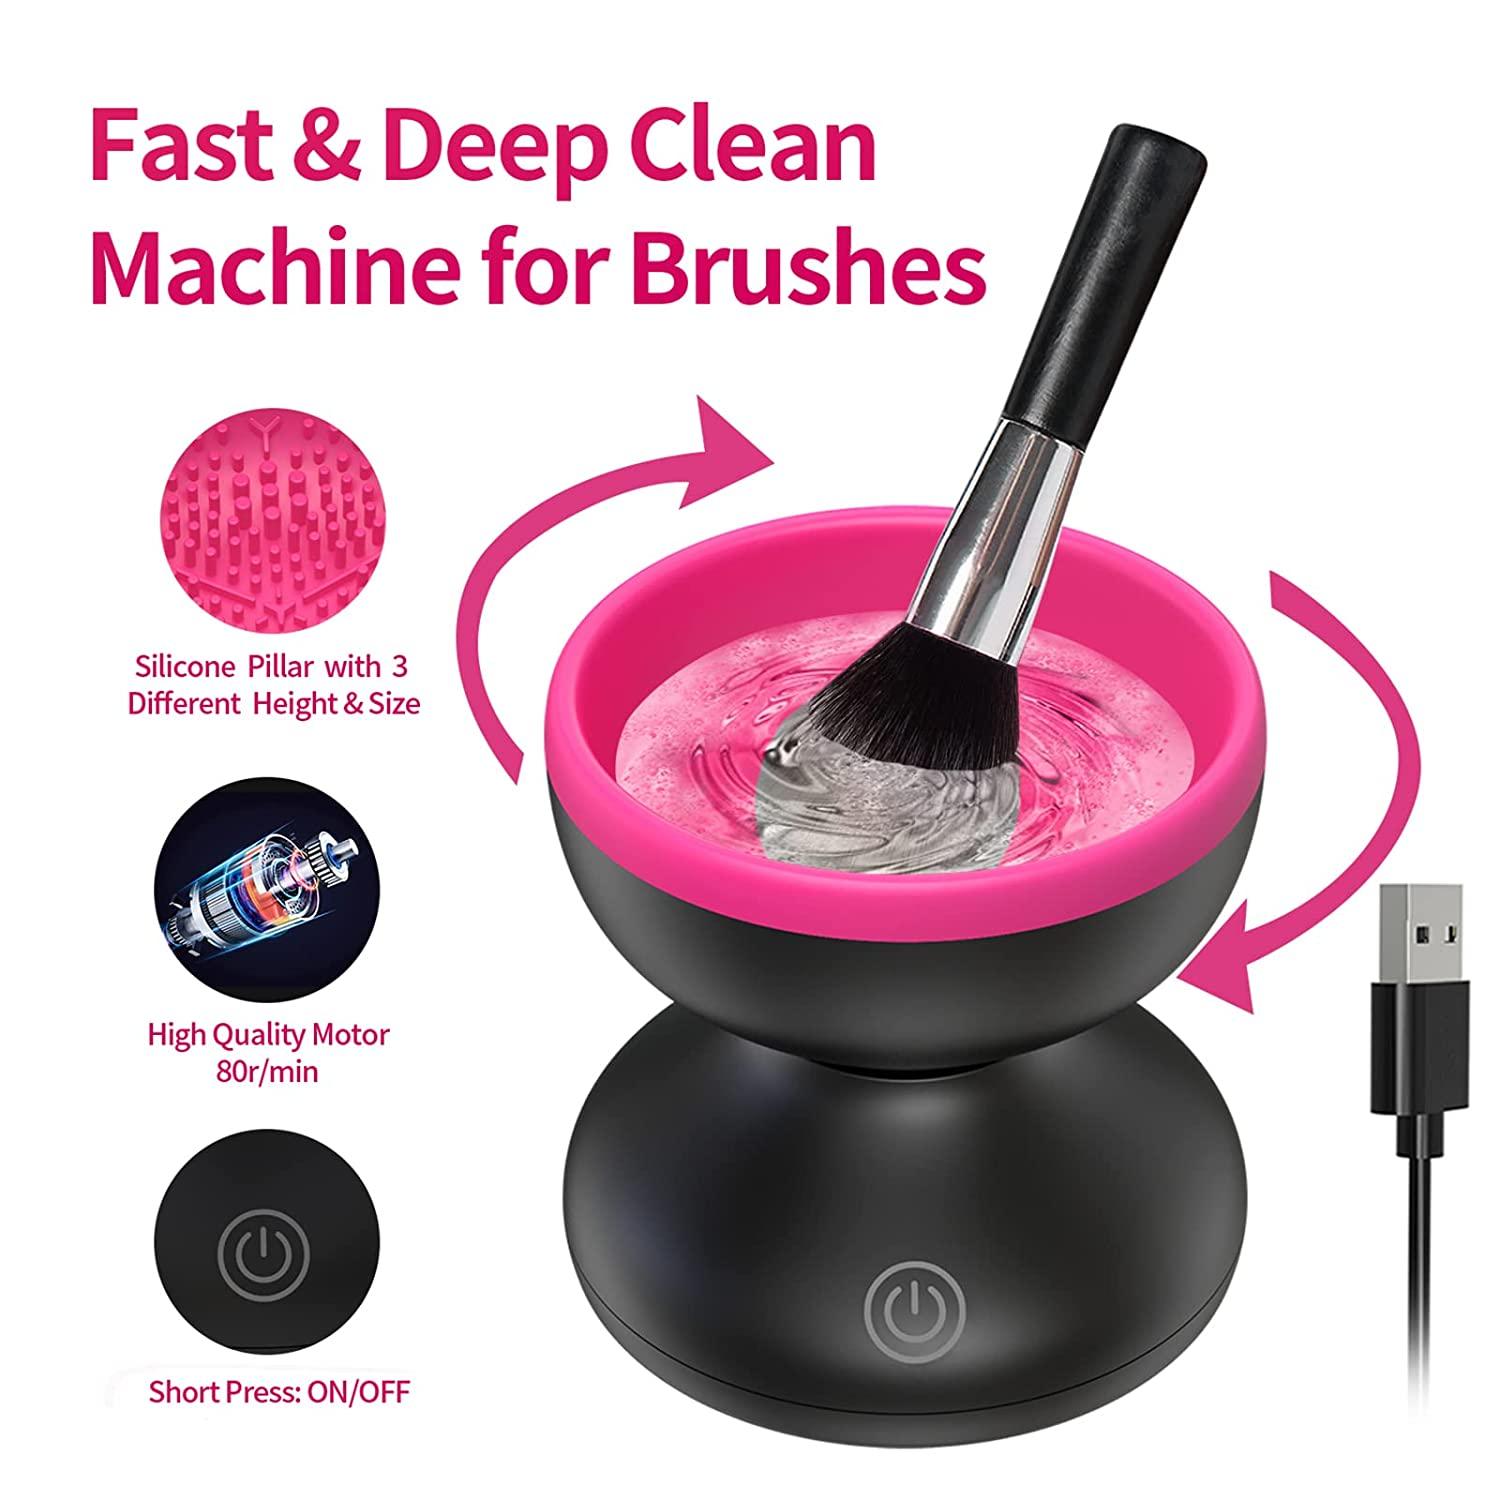 Electric Makeup Brush Cleaner,Portable Automatic USB Cosmetic